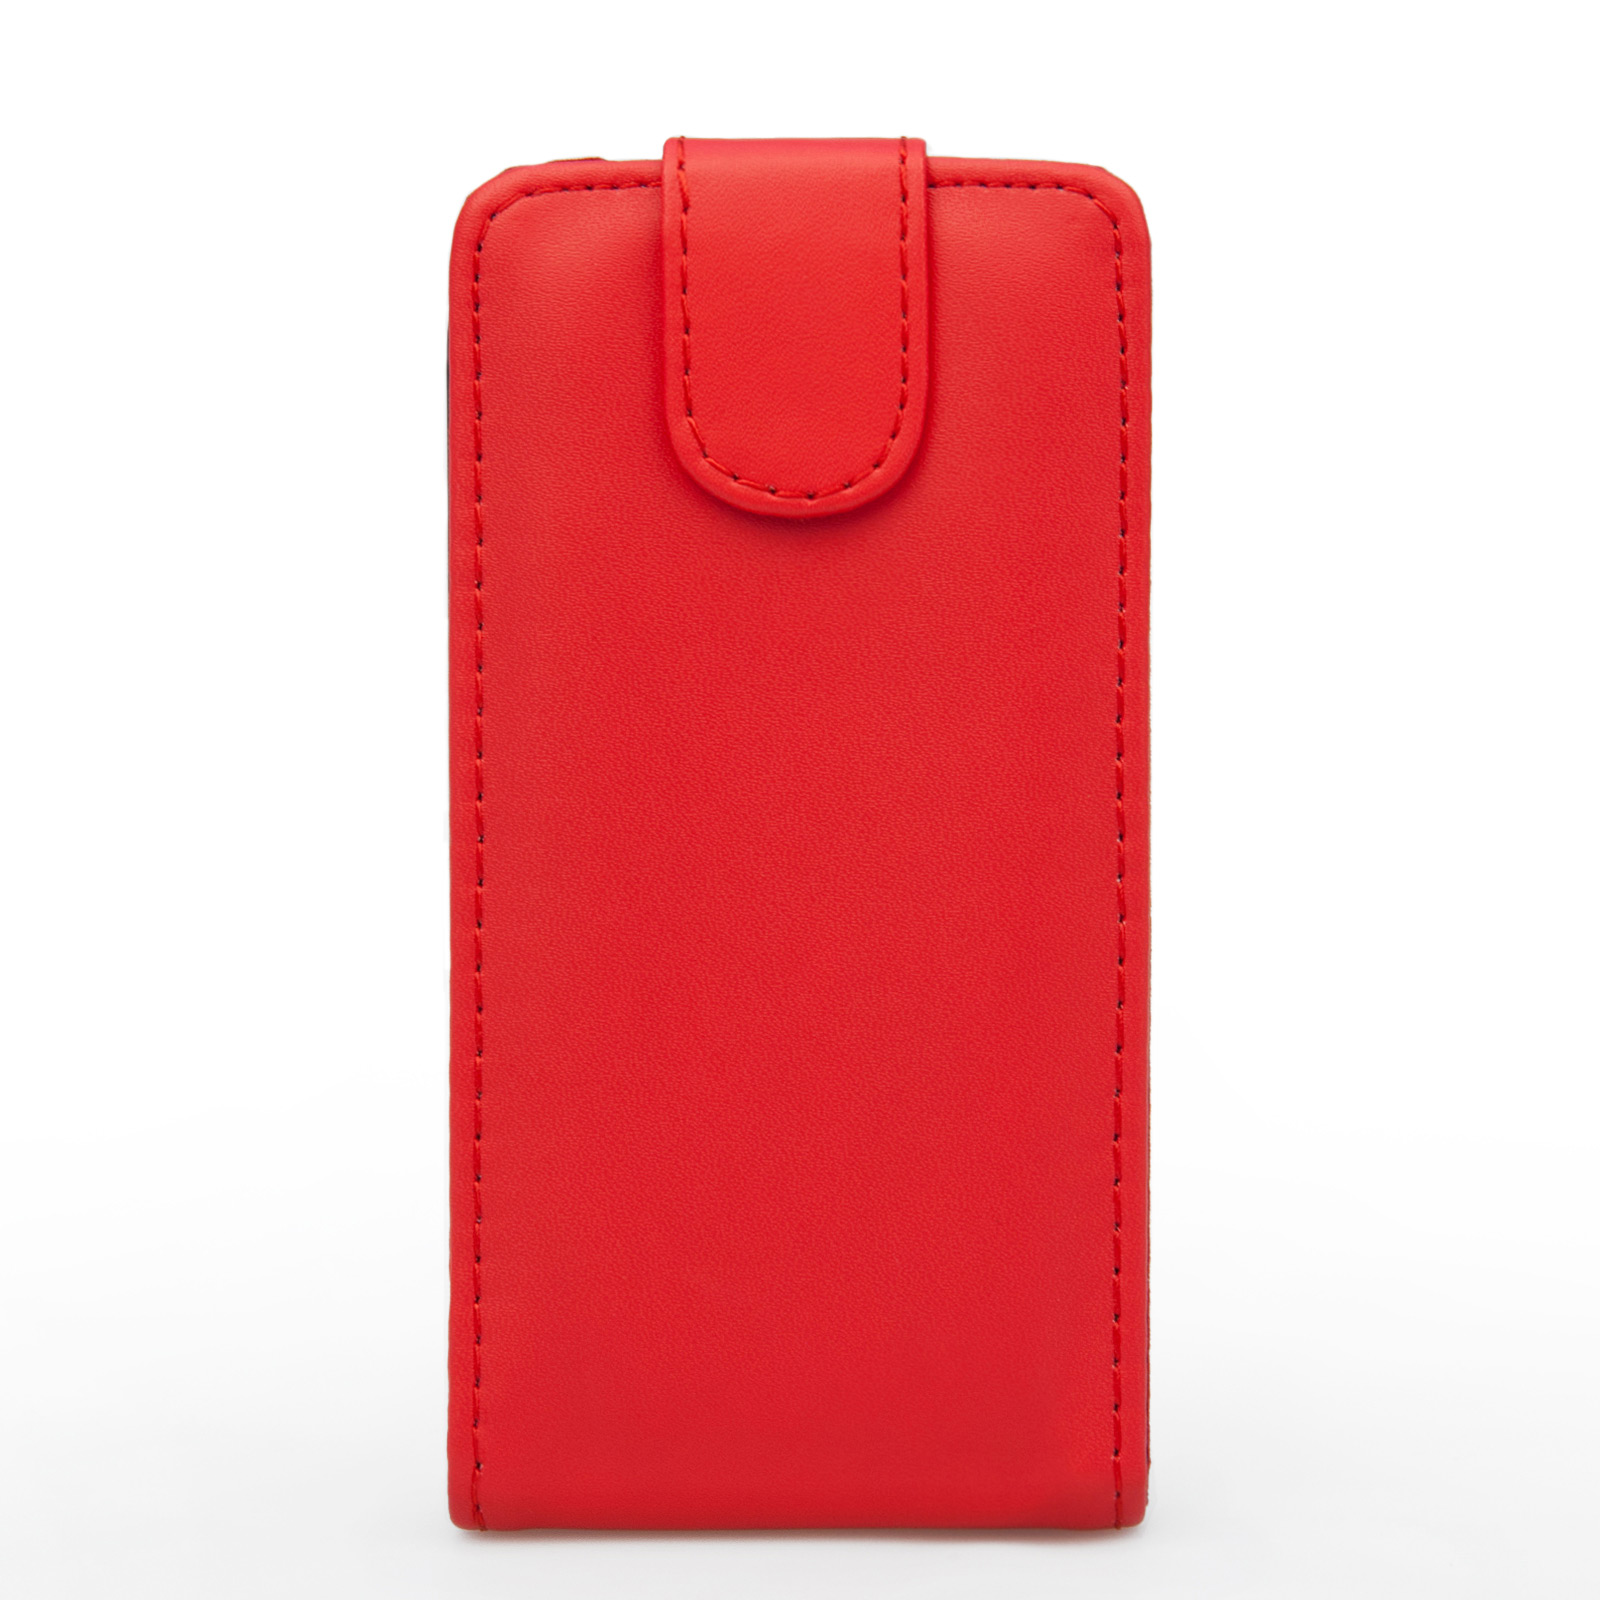 YouSave Accessories LG G2 Mini Leather-Effect Flip Case - Red